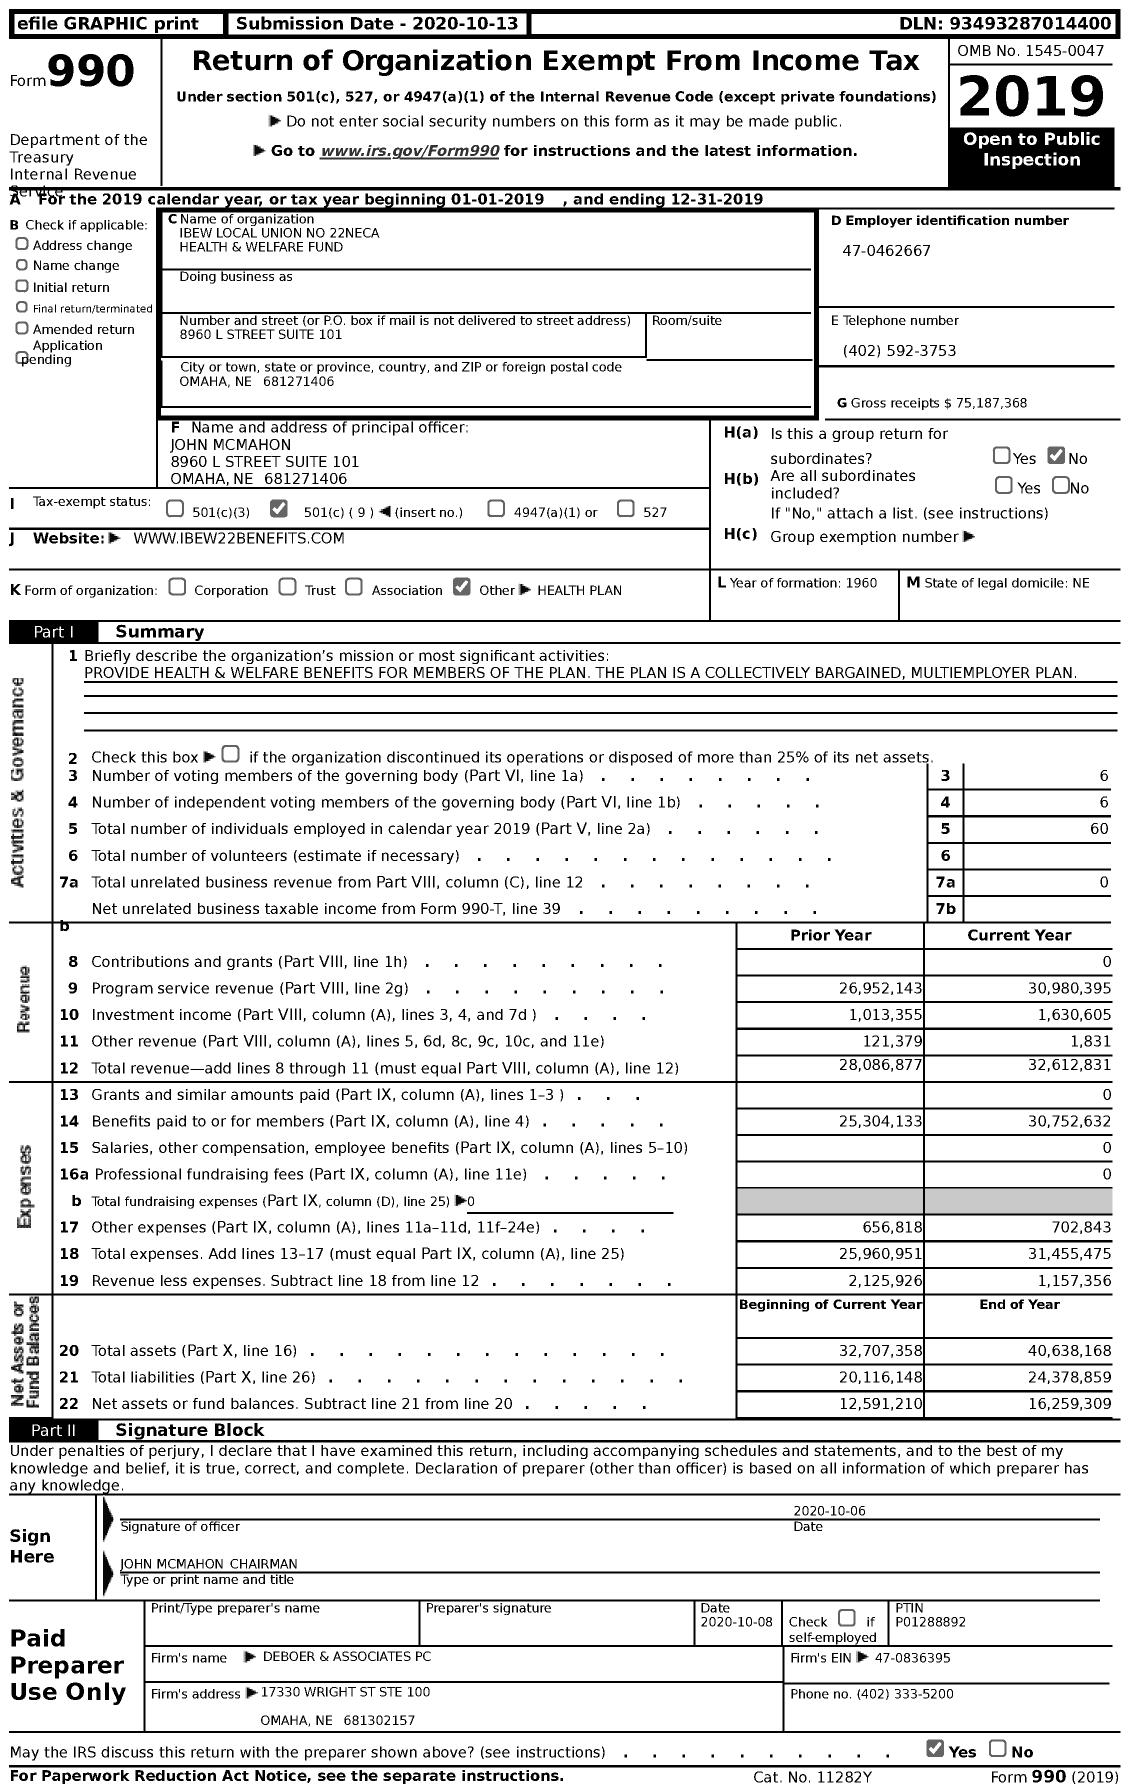 Image of first page of 2019 Form 990 for IBEW Local Union No 22neca Health and Welfare Fund